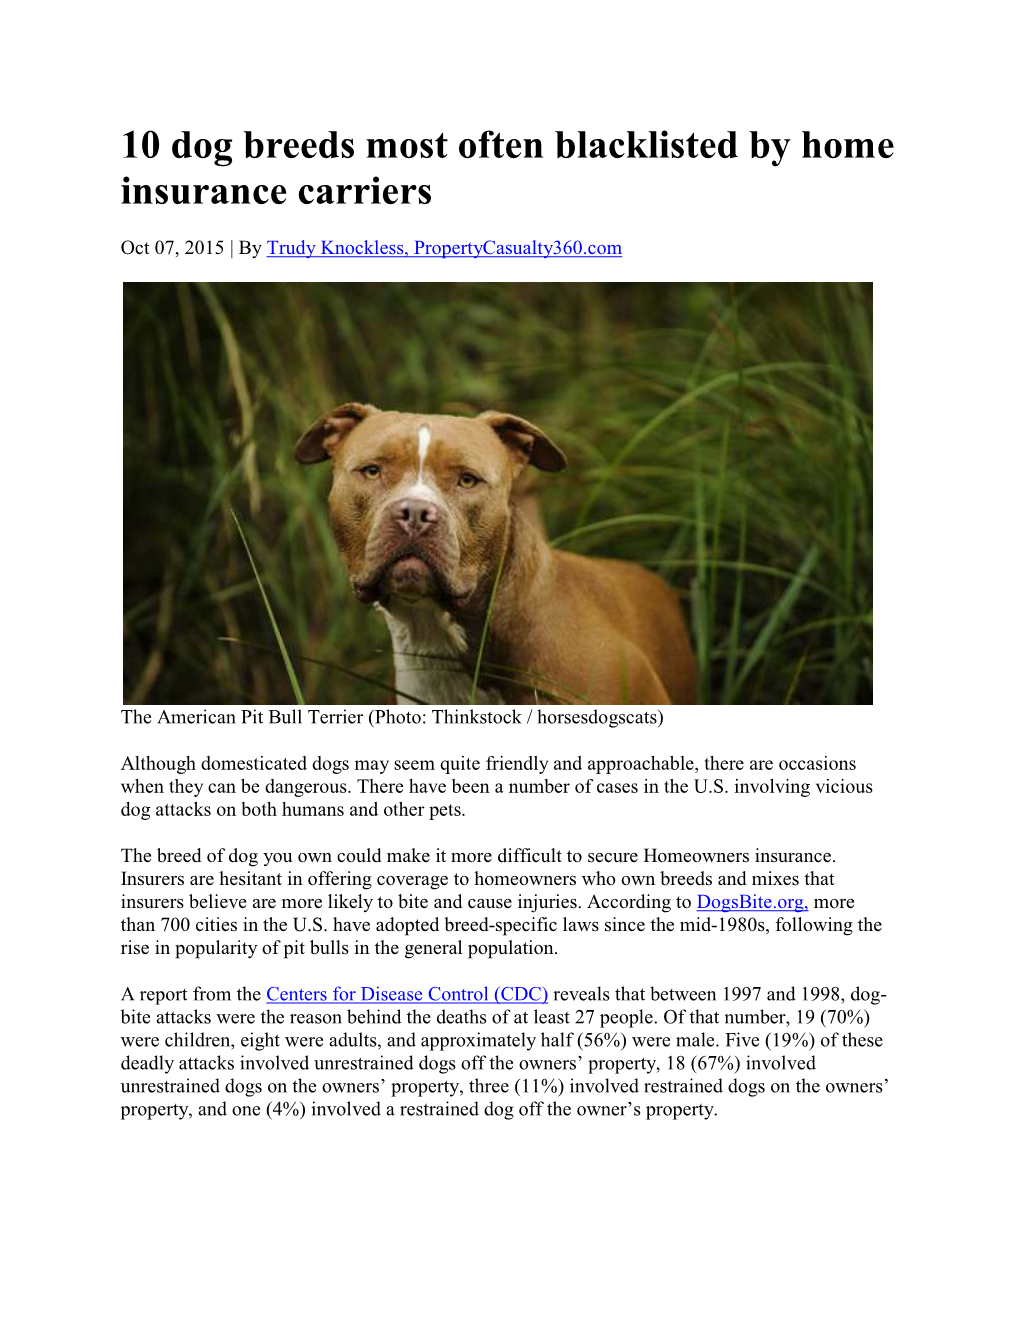 10 Dog Breeds Most Often Blacklisted by Home Insurance Carriers